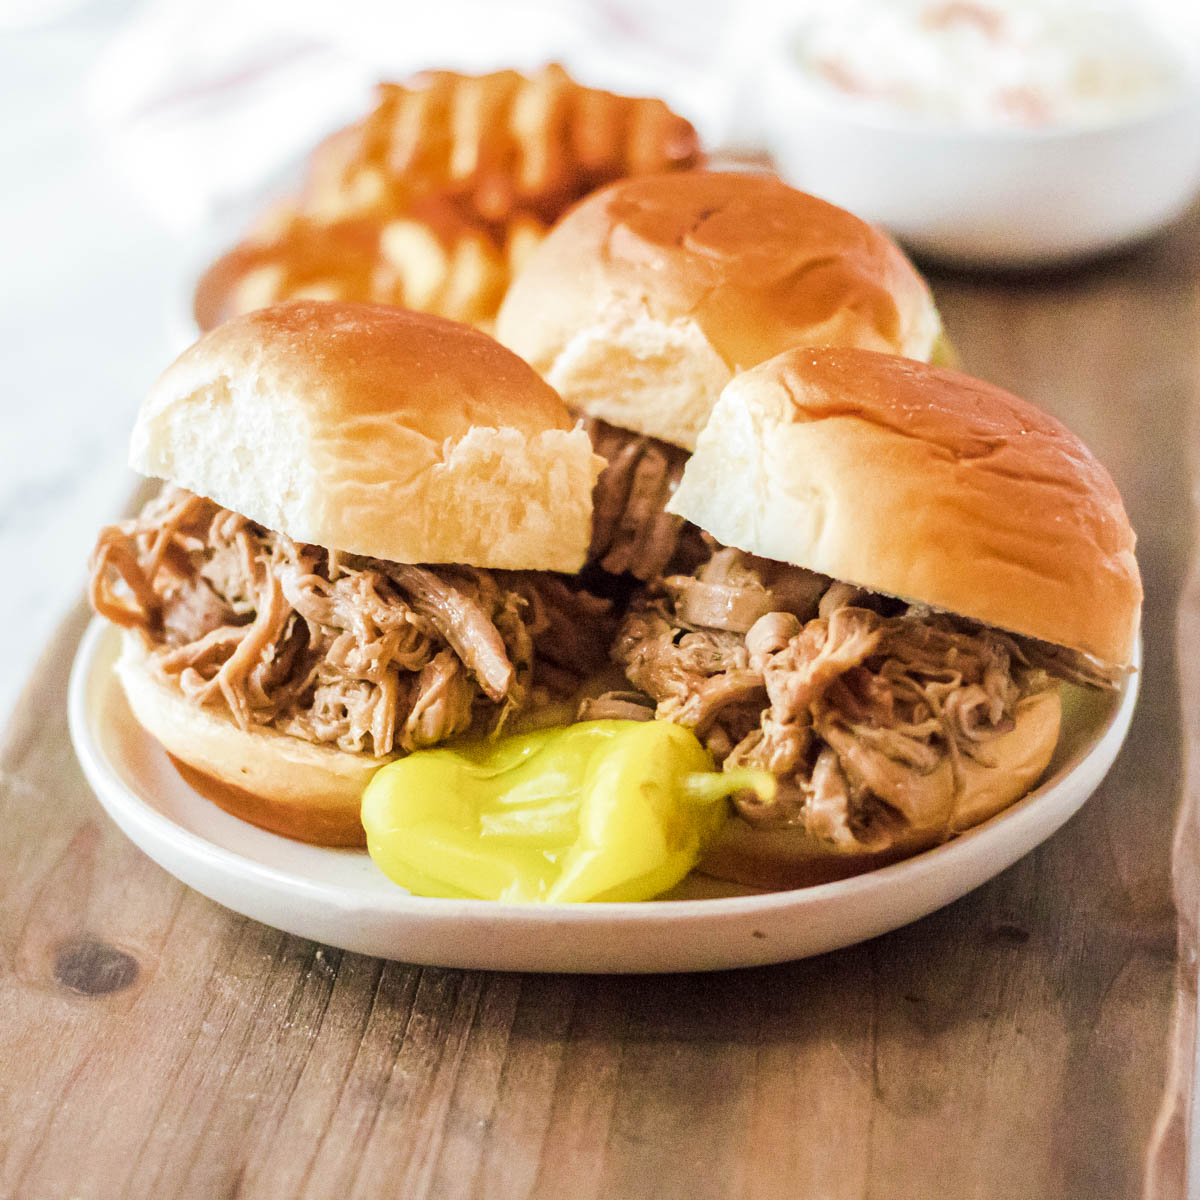 Three buns filled with shredded Mississippi Pork Roast on a white plate.